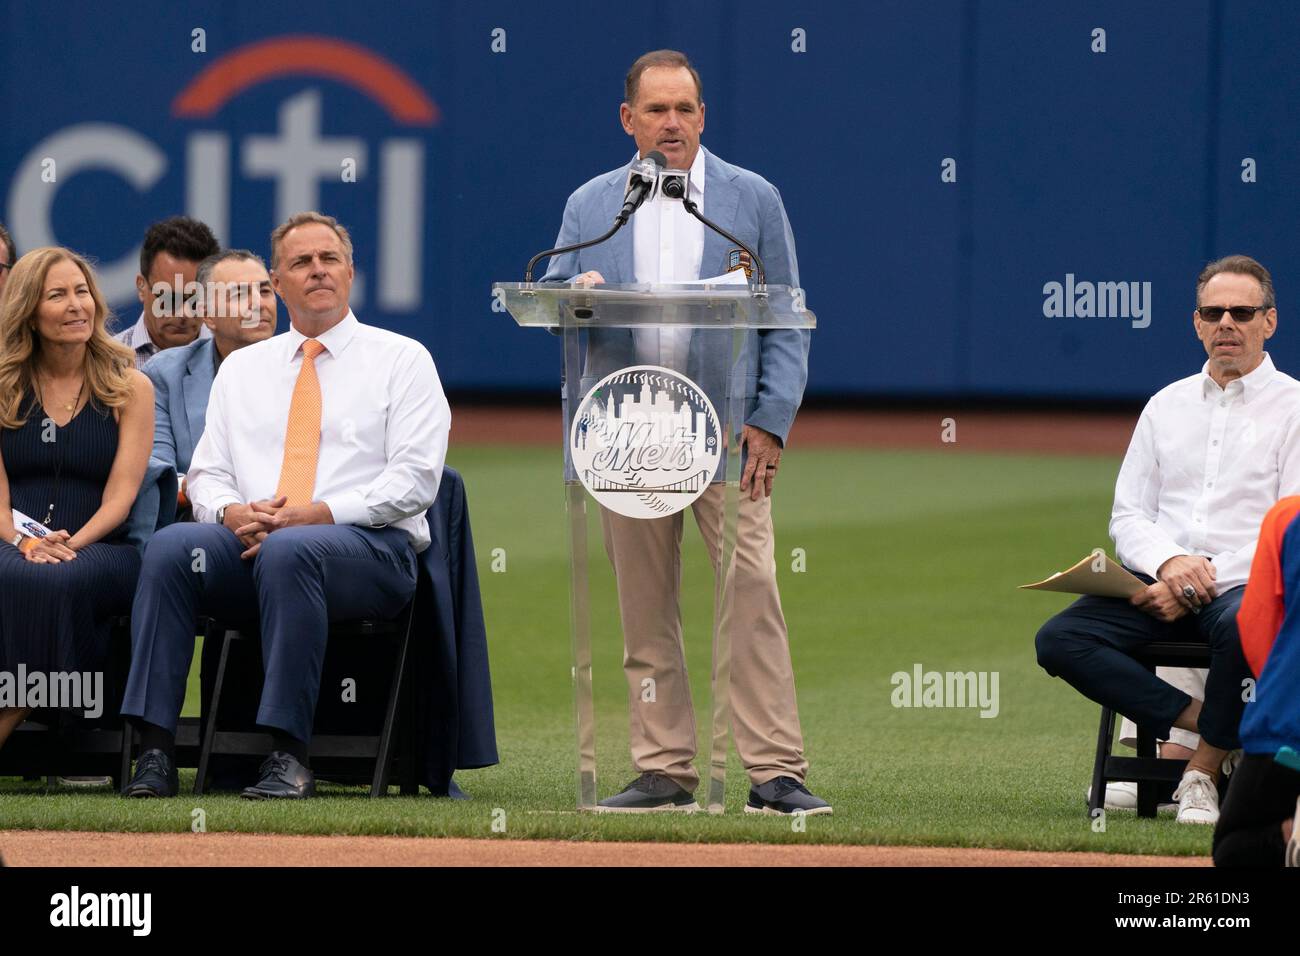 FLUSHING, NY - JUNE 03: Former New York Mets Third Baseman Howard Johnson  makes his acceptance speech into the Mets Hall of Fame prior to the Major  League Baseball game between the